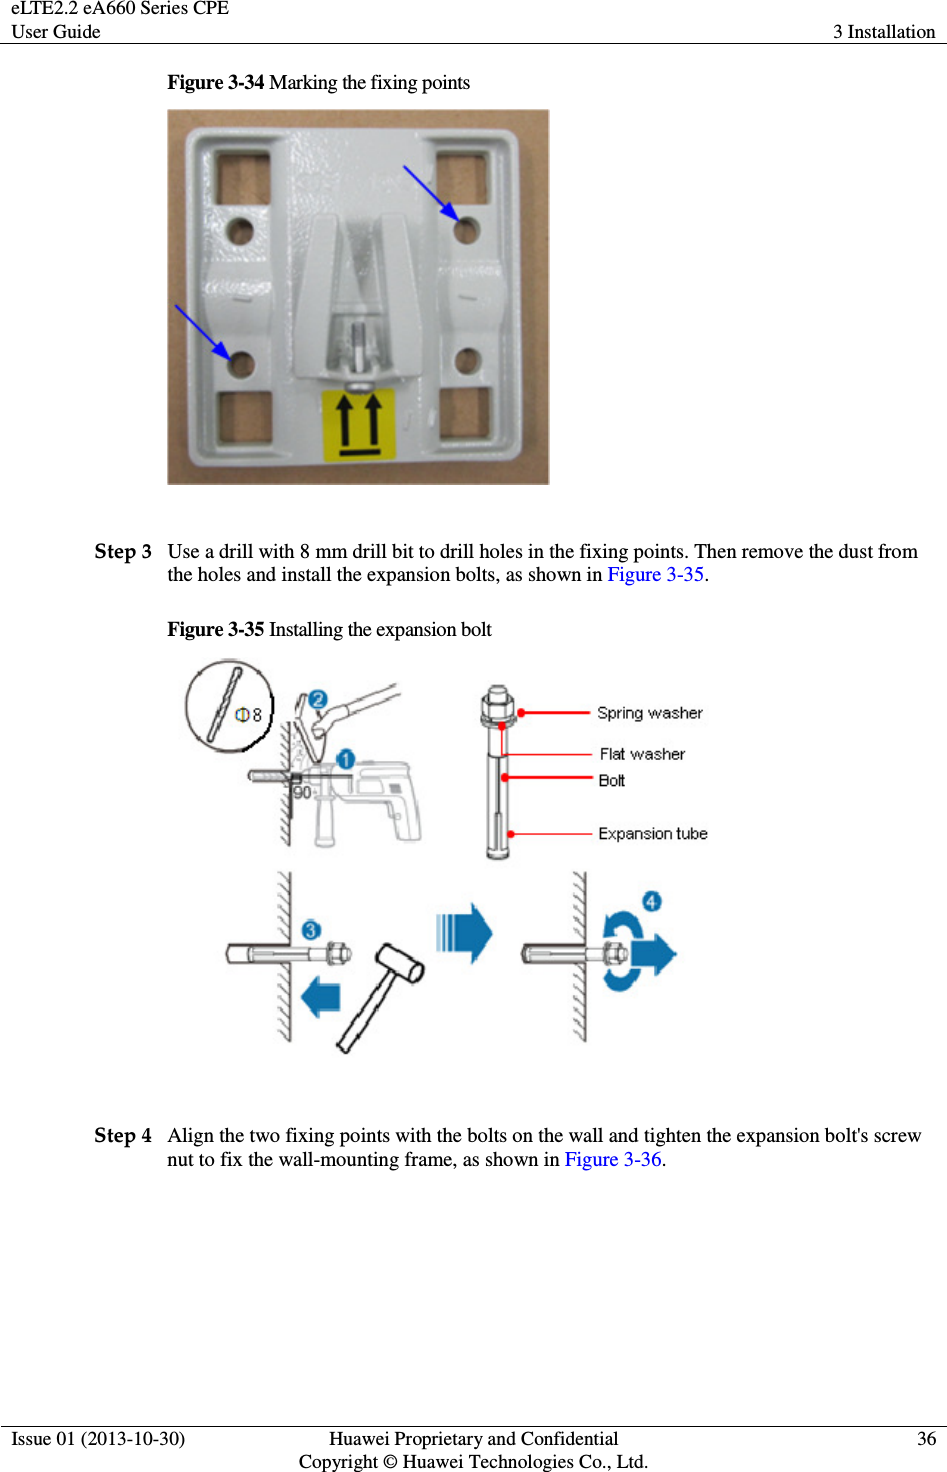 eLTE2.2 eA660 Series CPE User Guide  3 Installation  Issue 01 (2013-10-30)  Huawei Proprietary and Confidential                                     Copyright © Huawei Technologies Co., Ltd. 36  Figure 3-34 Marking the fixing points   Step 3 Use a drill with 8 mm drill bit to drill holes in the fixing points. Then remove the dust from the holes and install the expansion bolts, as shown in Figure 3-35. Figure 3-35 Installing the expansion bolt   Step 4 Align the two fixing points with the bolts on the wall and tighten the expansion bolt&apos;s screw nut to fix the wall-mounting frame, as shown in Figure 3-36. 